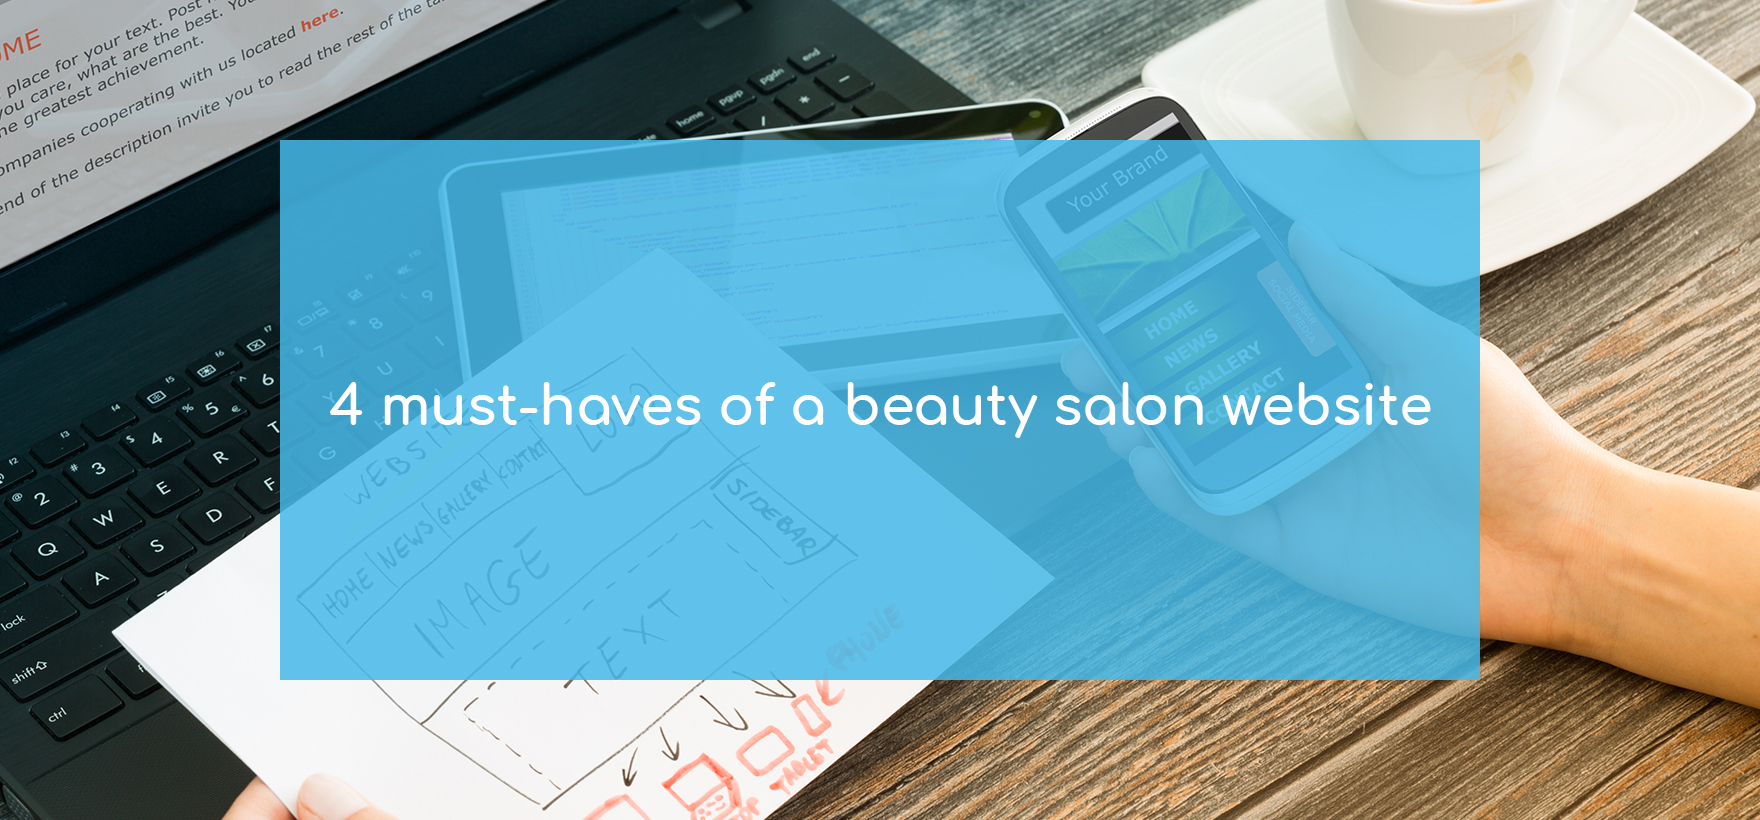 4 must-haves of a beauty salon website